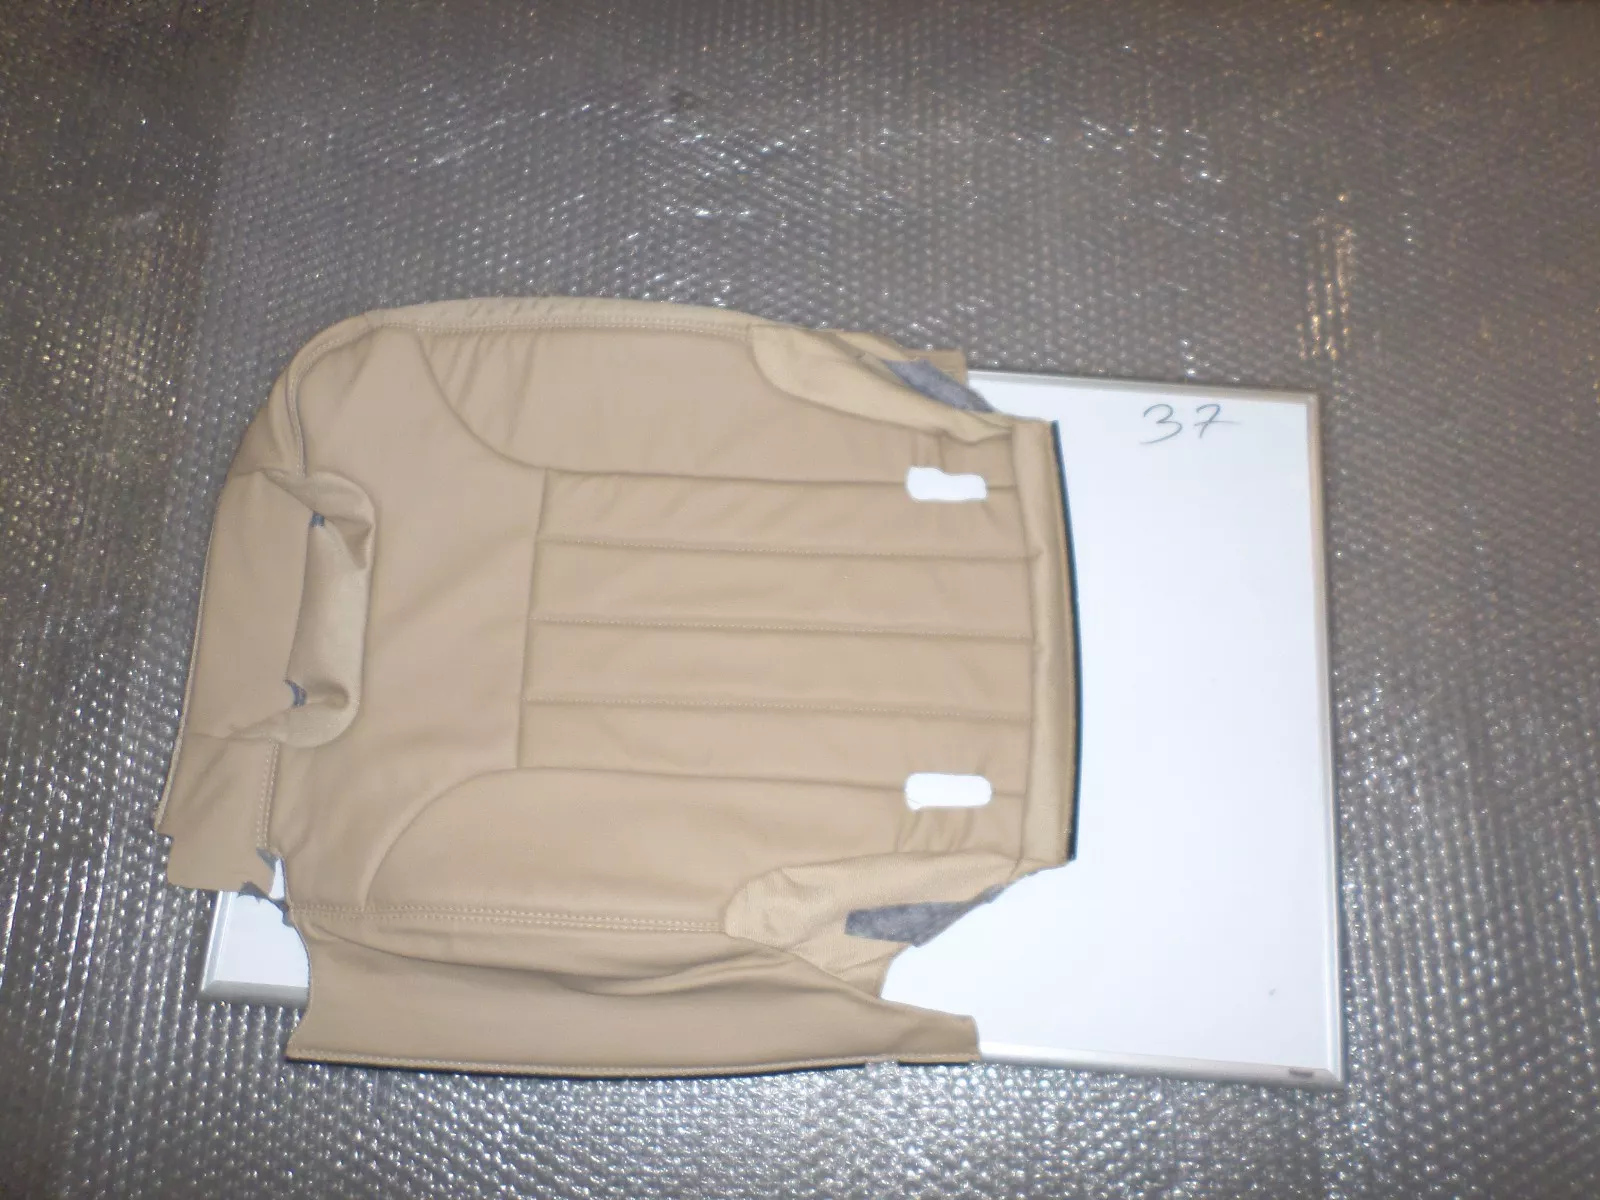 New OEM Mercedes 3rd Row LH Seat Cover 2006-2013 R-Class 251-930-08-87-8K55 - £77.58 GBP